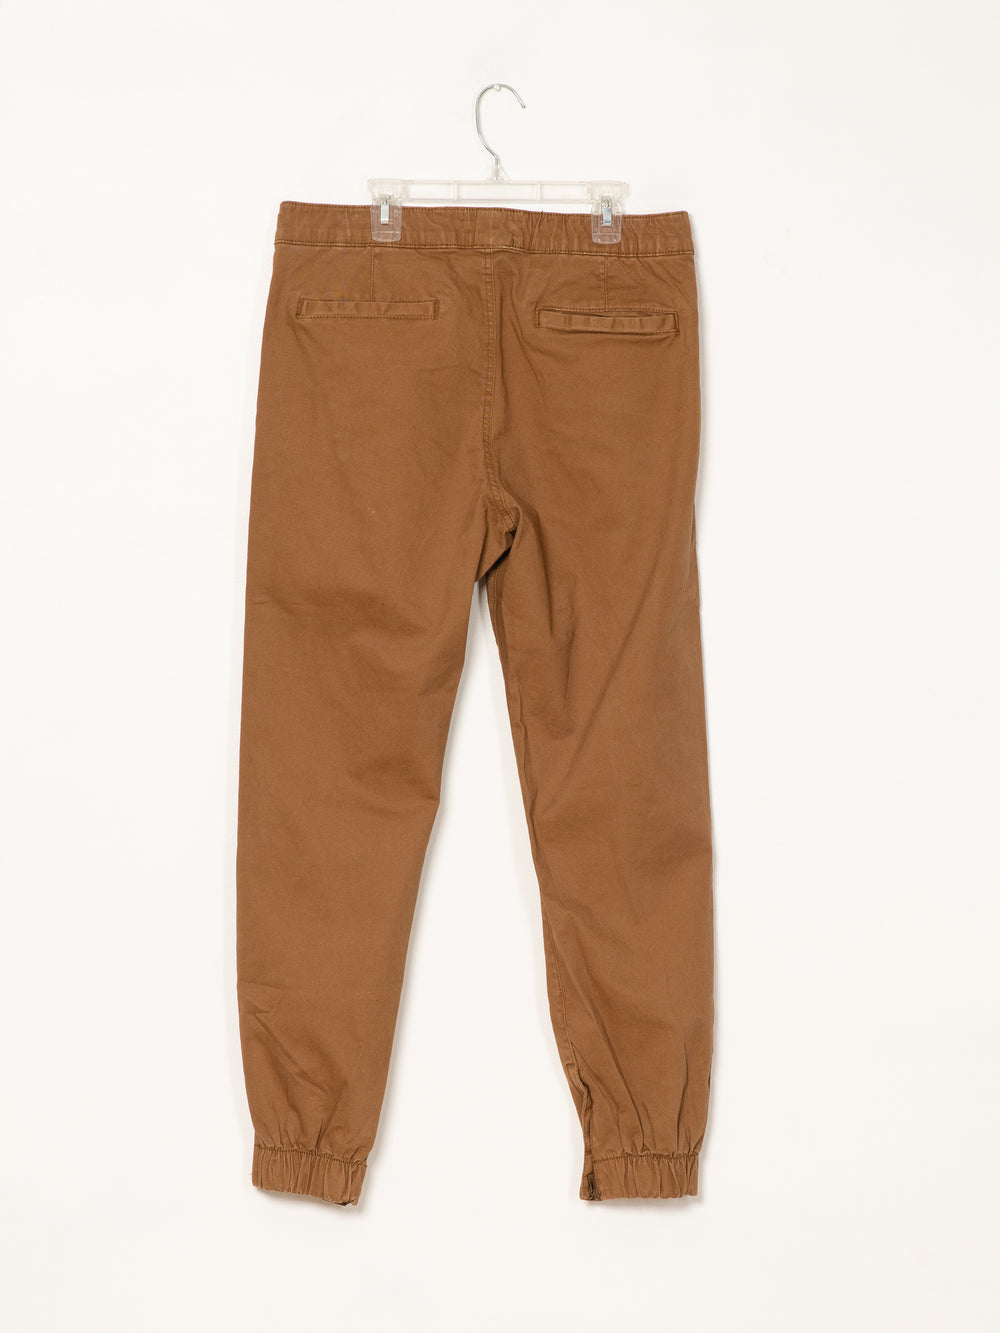 TAINTED CROCKETT RUGBY JOGGER - FLAX